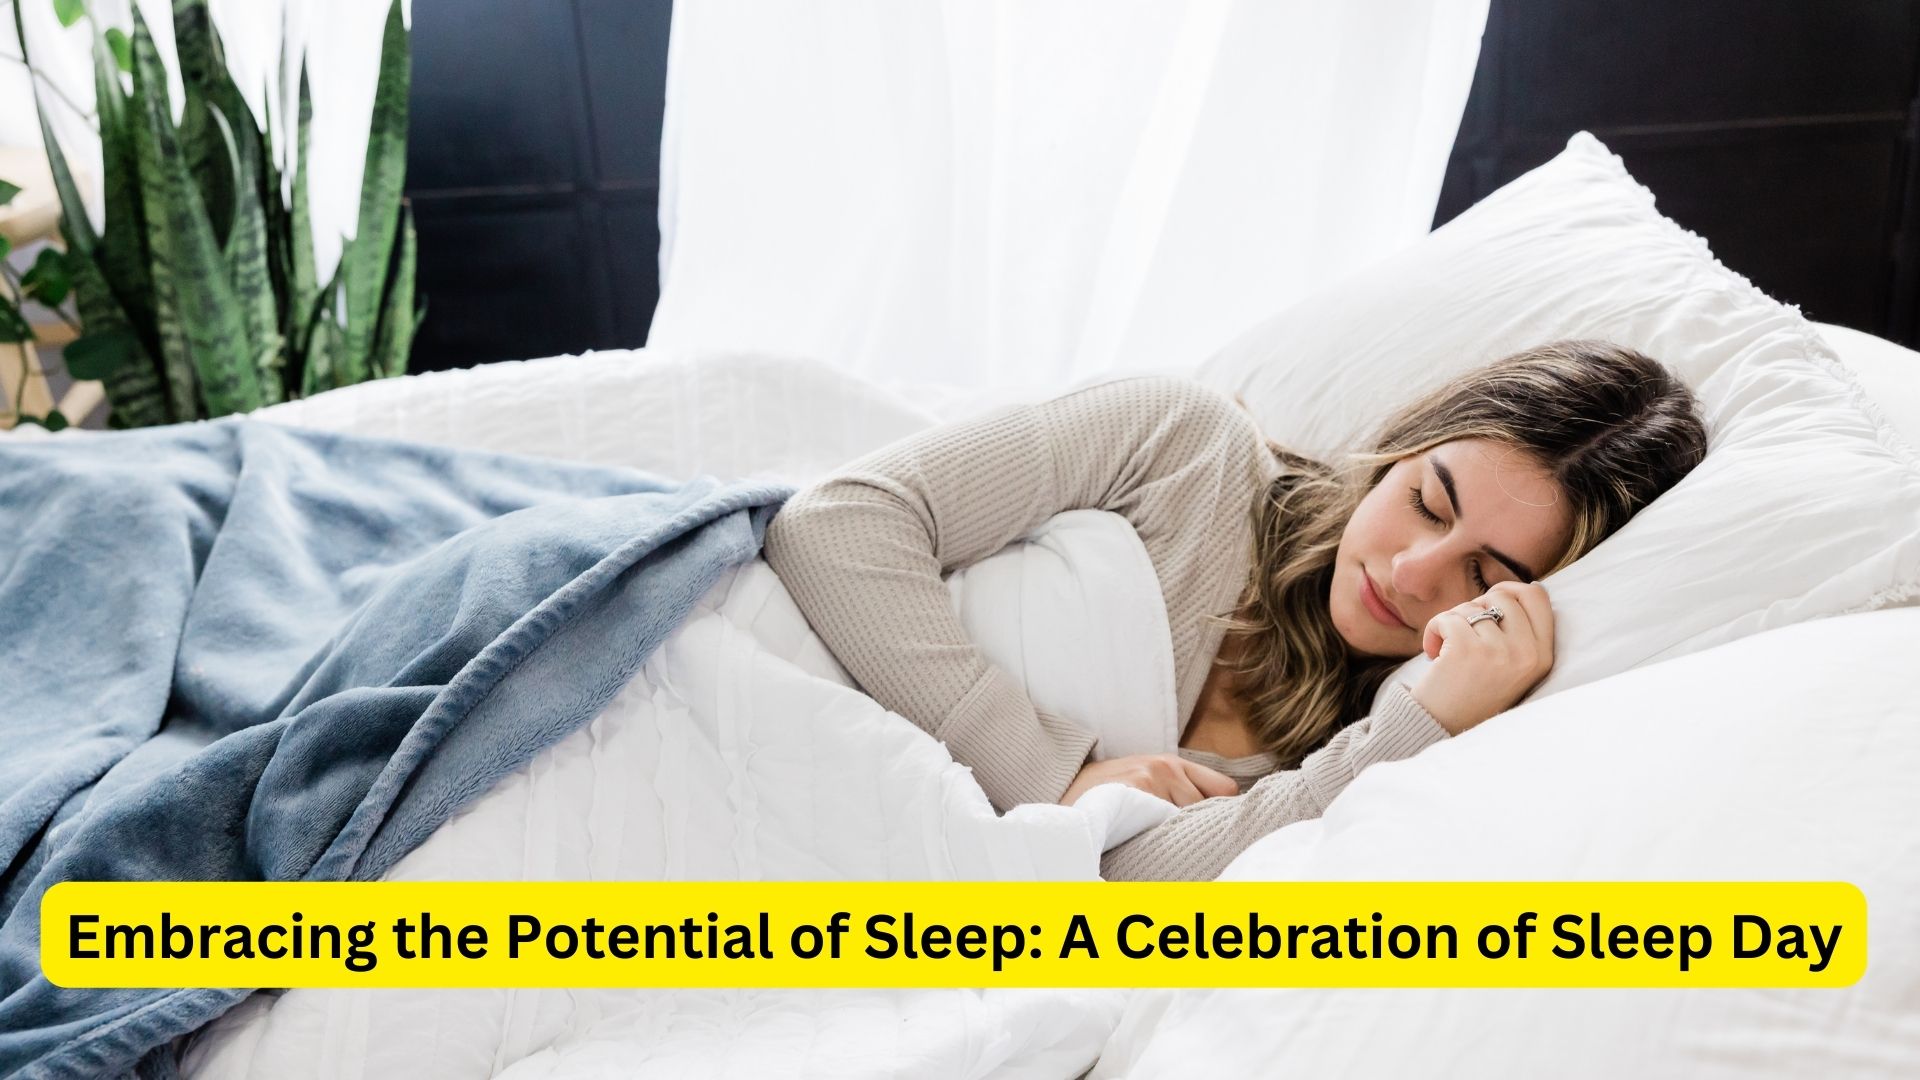 Embracing the Potential of Sleep: A Celebration of Sleep Day